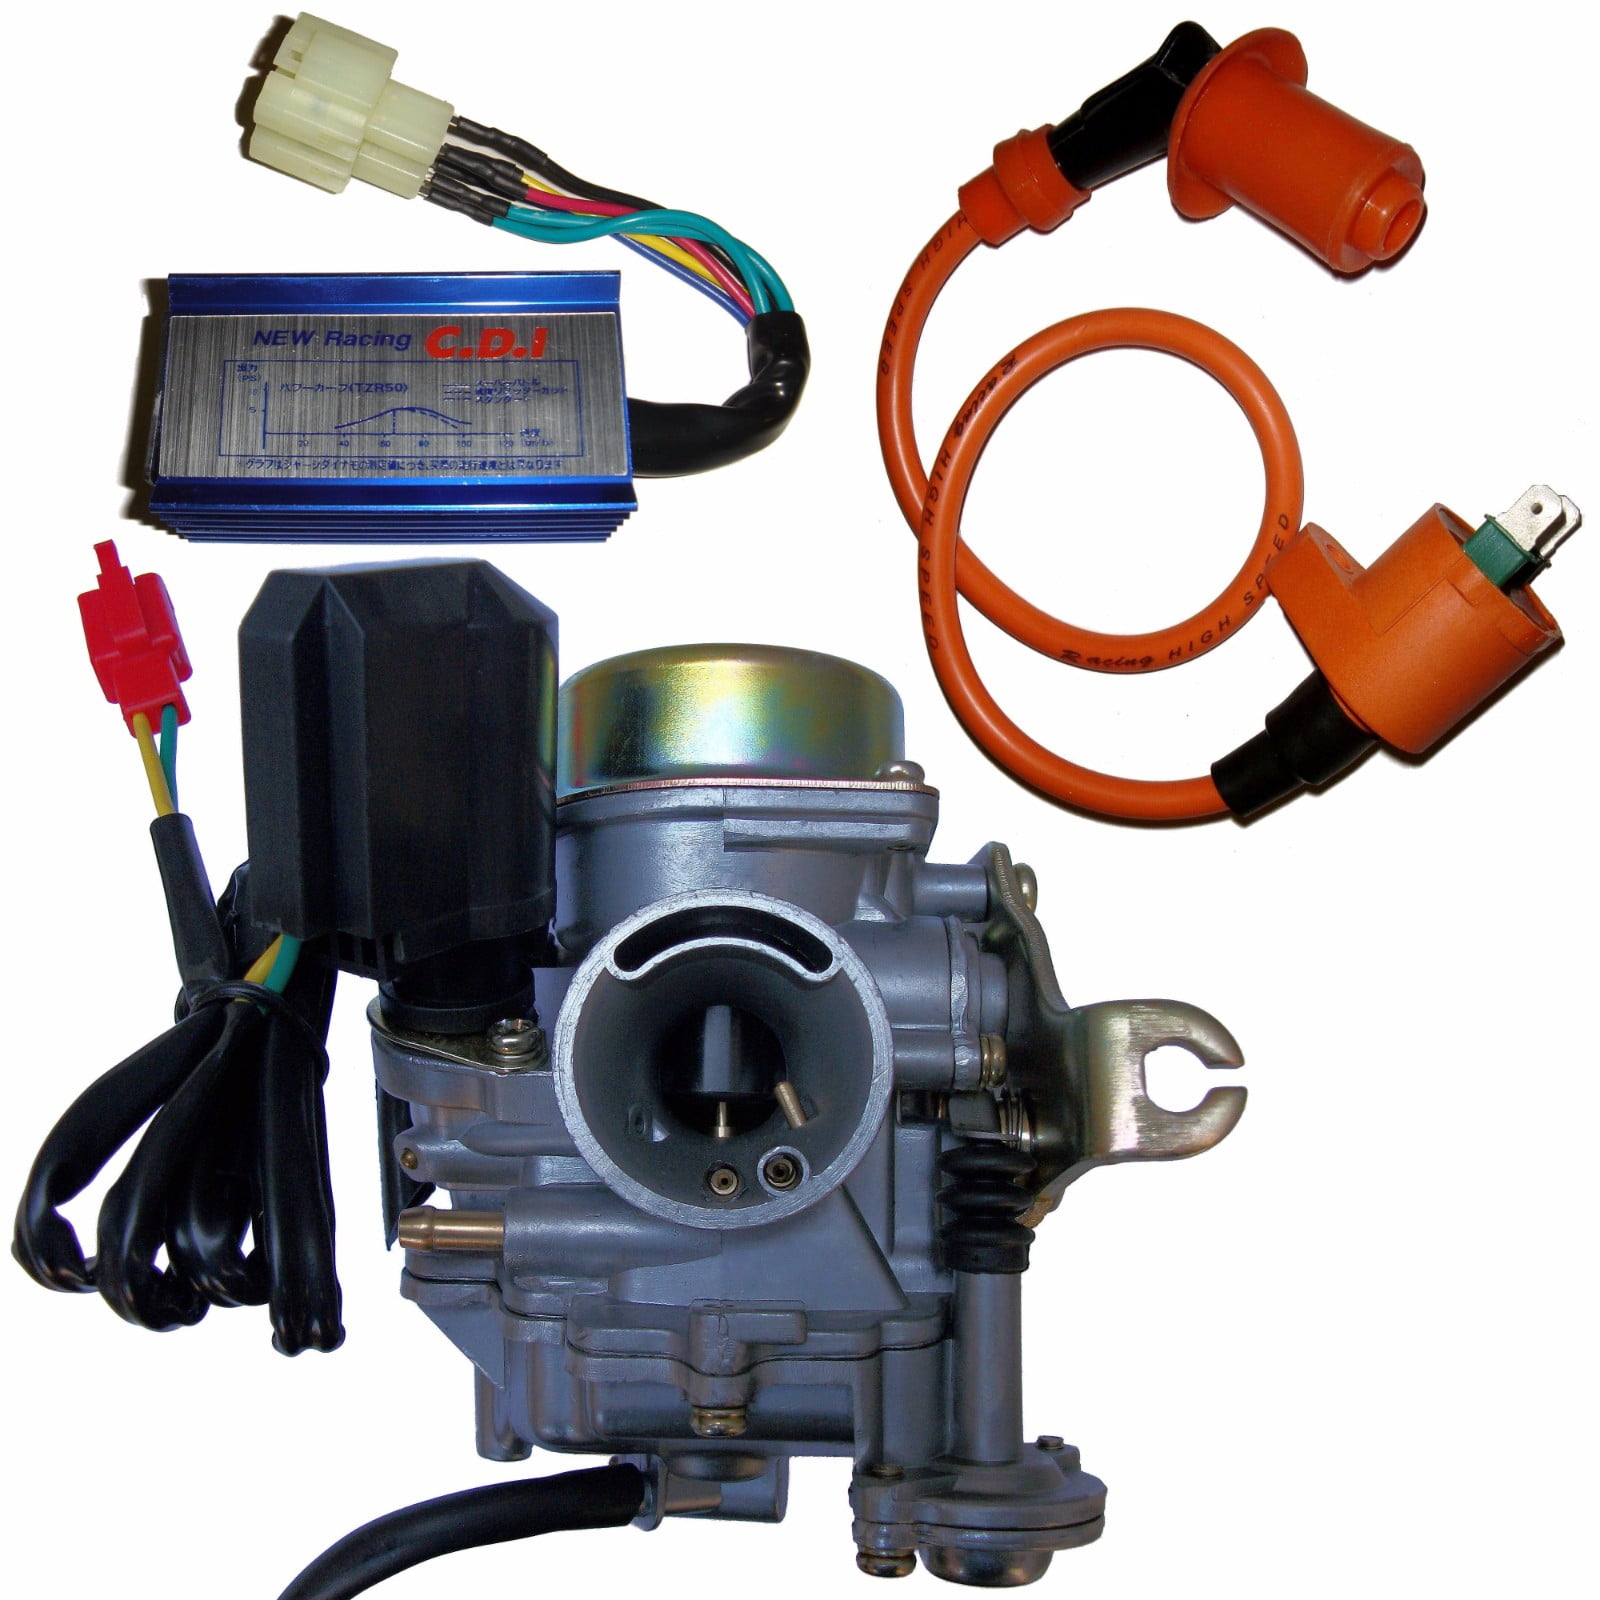 20mm GY6 50 50cc Performance CDI Box Ignition coil Chinese - Walmart.com